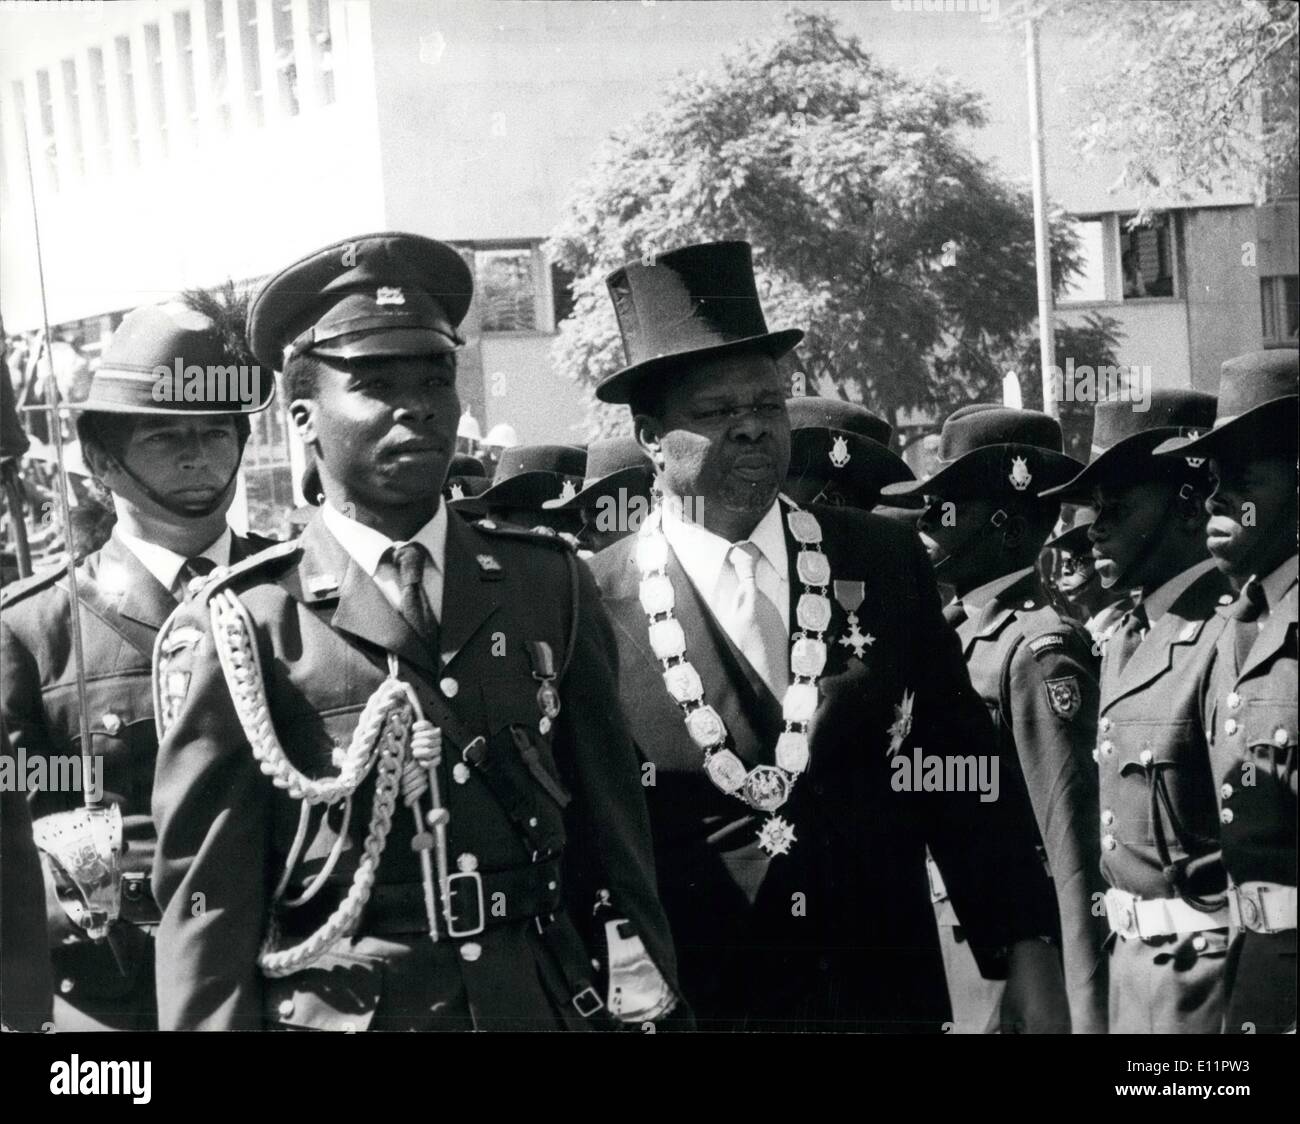 Jun. 06, 1979 - Ceremonial opening of the First Parliament of Zimbabwe-Rhodesia. The ceremonial opening of Parliament in Salisbury of the first Black Parliament of the country of Zimbabwe-Rhodesia, took place on Wednesday the 26th of June. Photo Shows: President Gumede, the first President of Zimbabwe, seen inspecting a guard of honour during the opening of Parliament. The topper he was wearing had to be borrowed from a local magician as there wasn't a size 7&frac12; to be found for Gumede anywhere in Salibury. Stock Photo